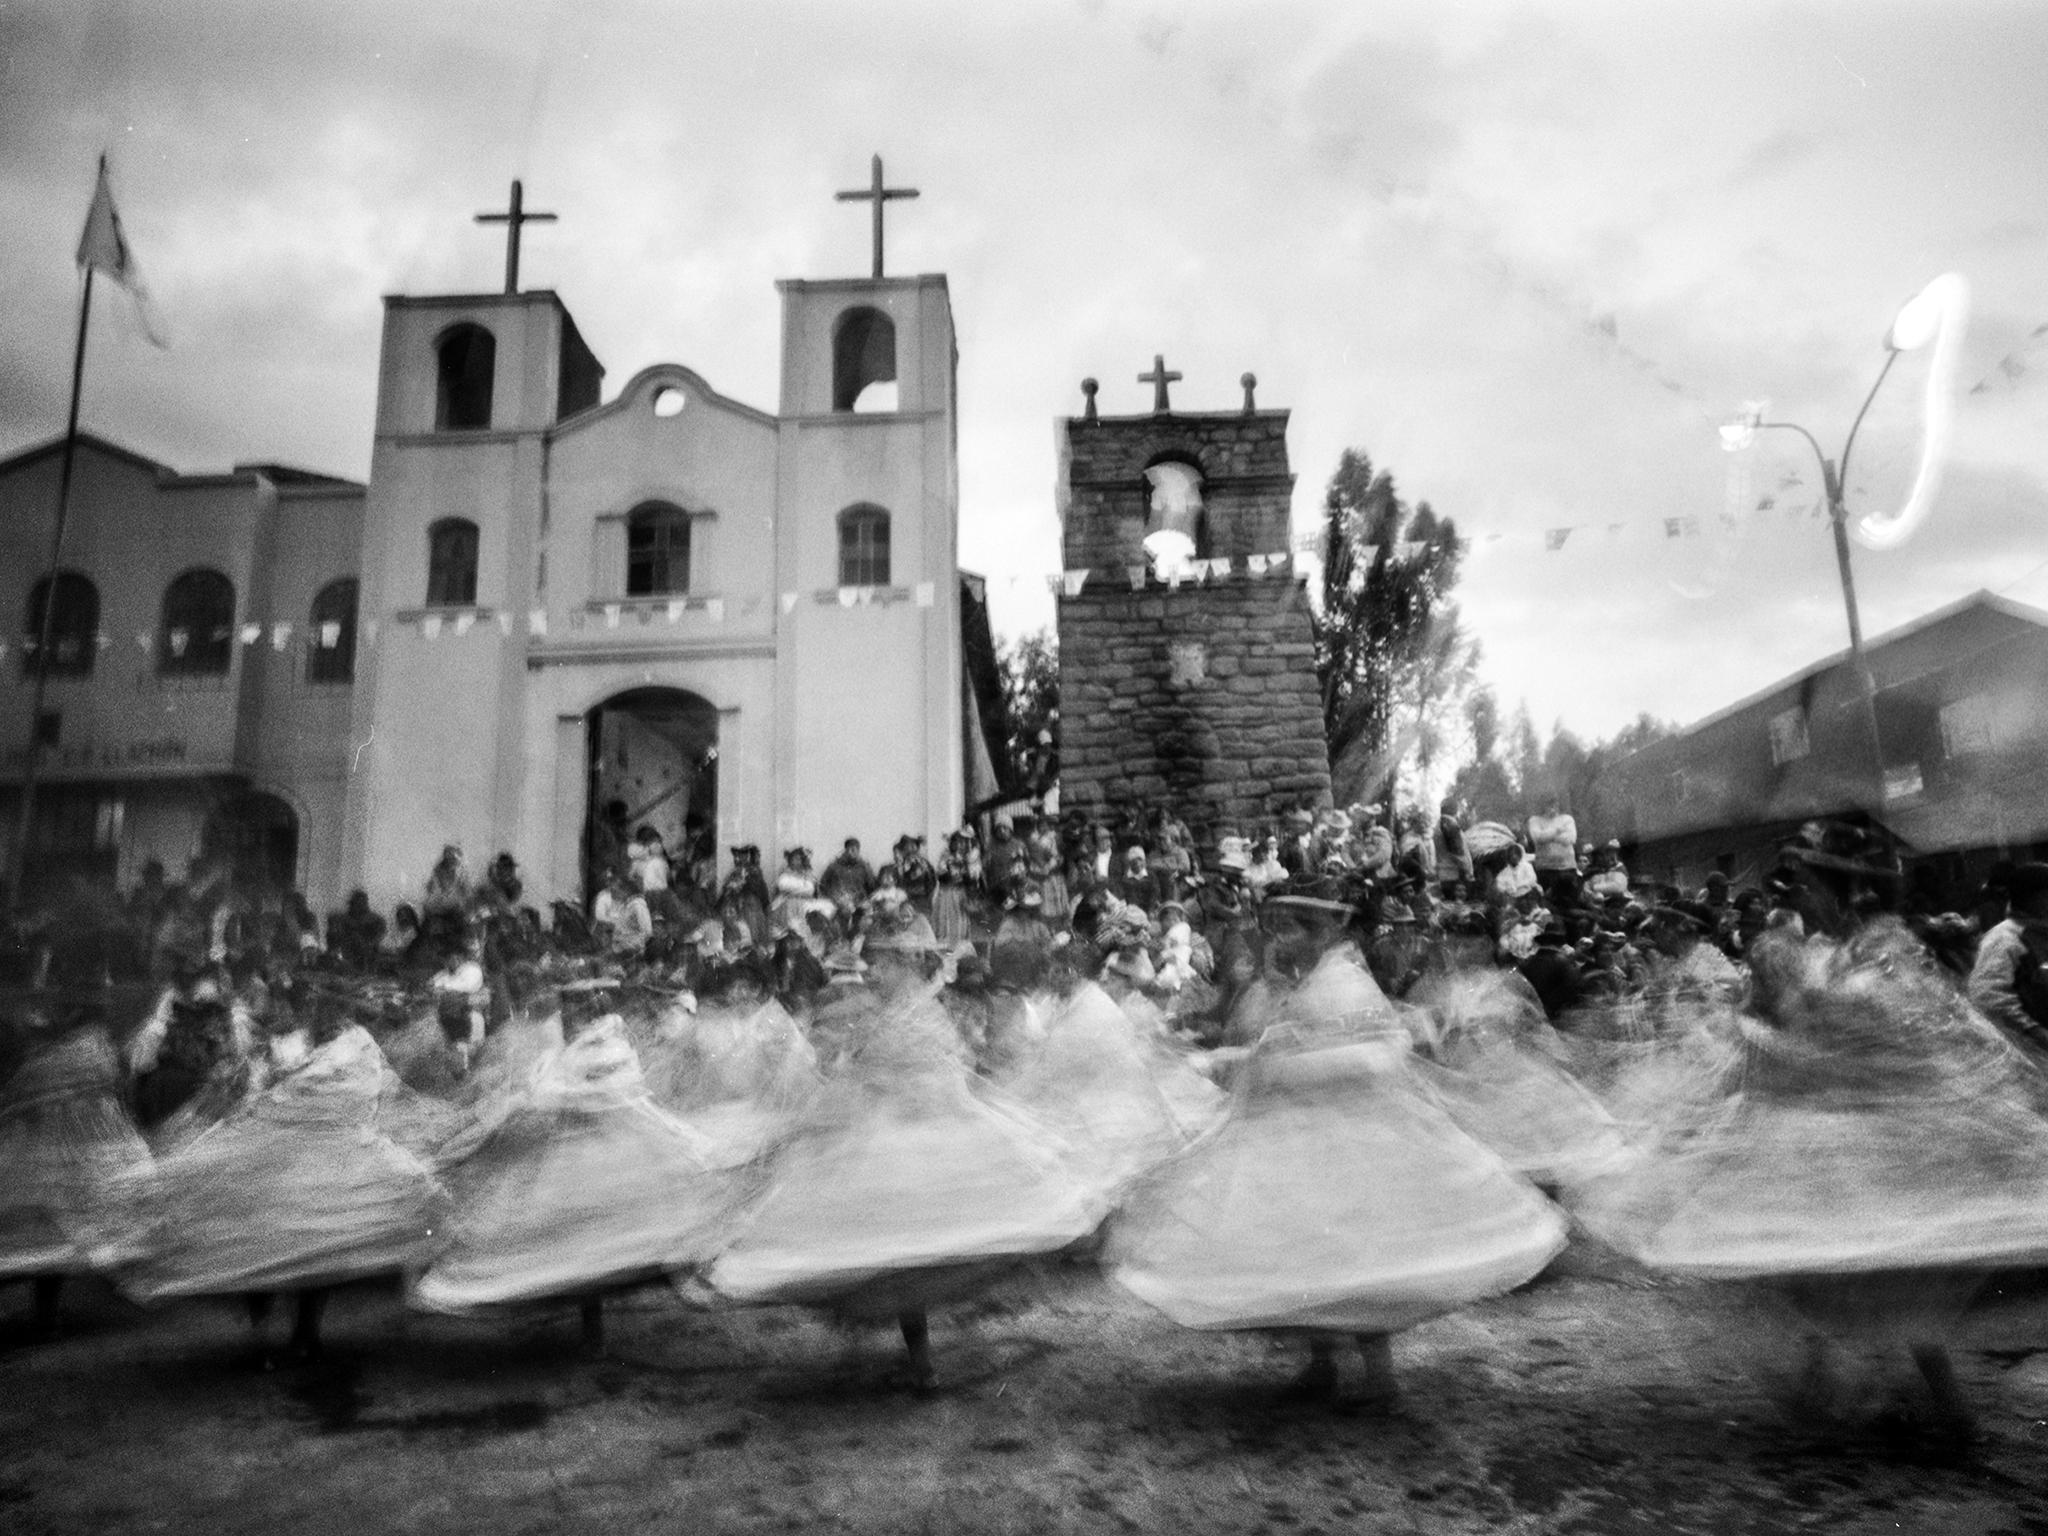 Dancers perform in Llachon during a fiesta celebrating the patron saint, Saint Anthony of Padua, and the community’s anniversary in June 2013